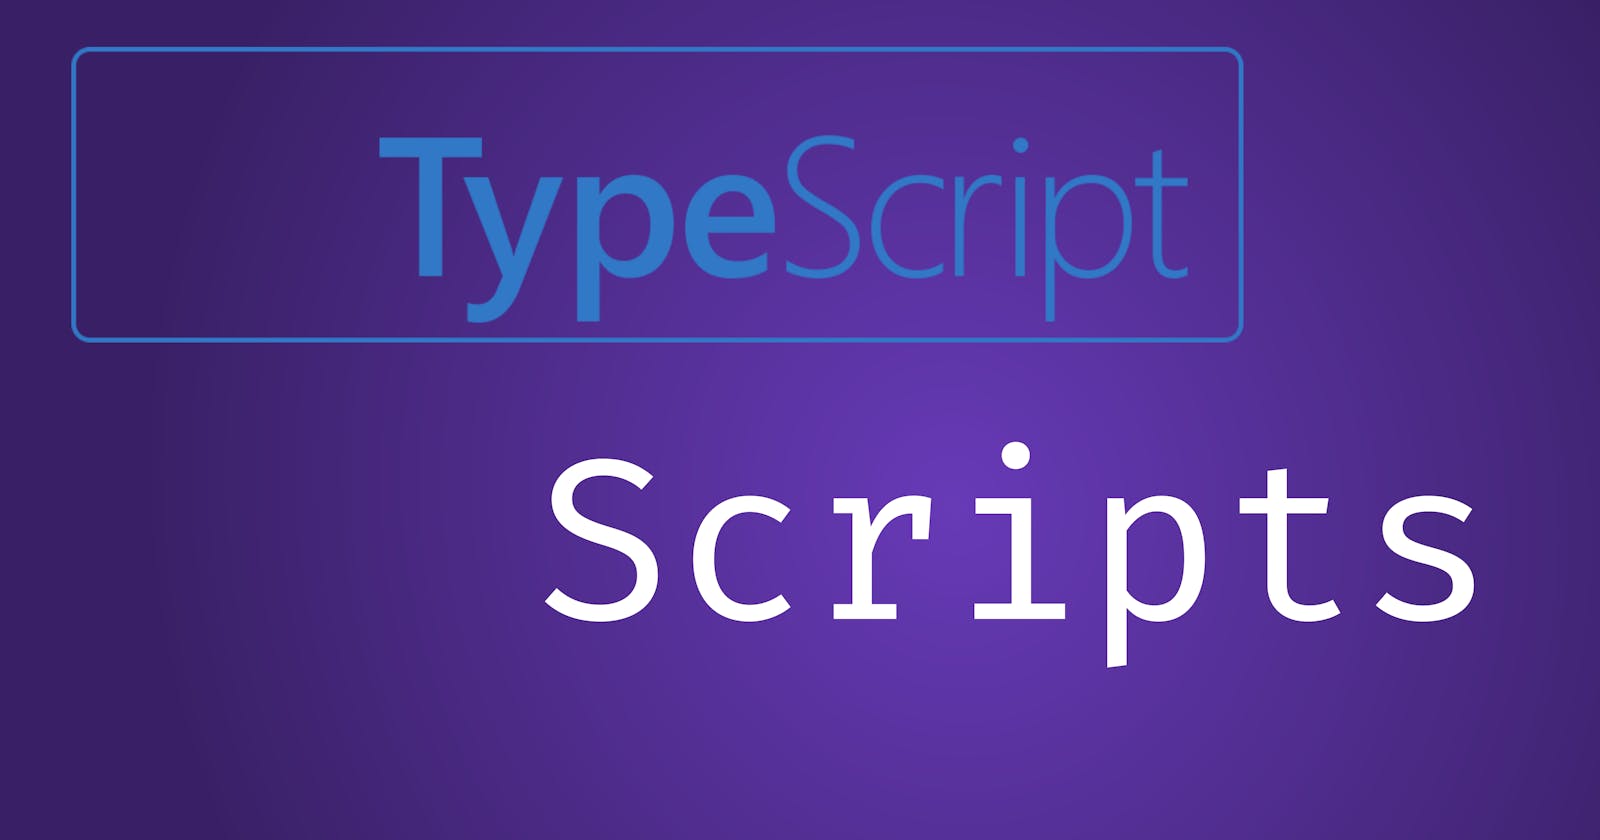 Running TypeScript without Compiling